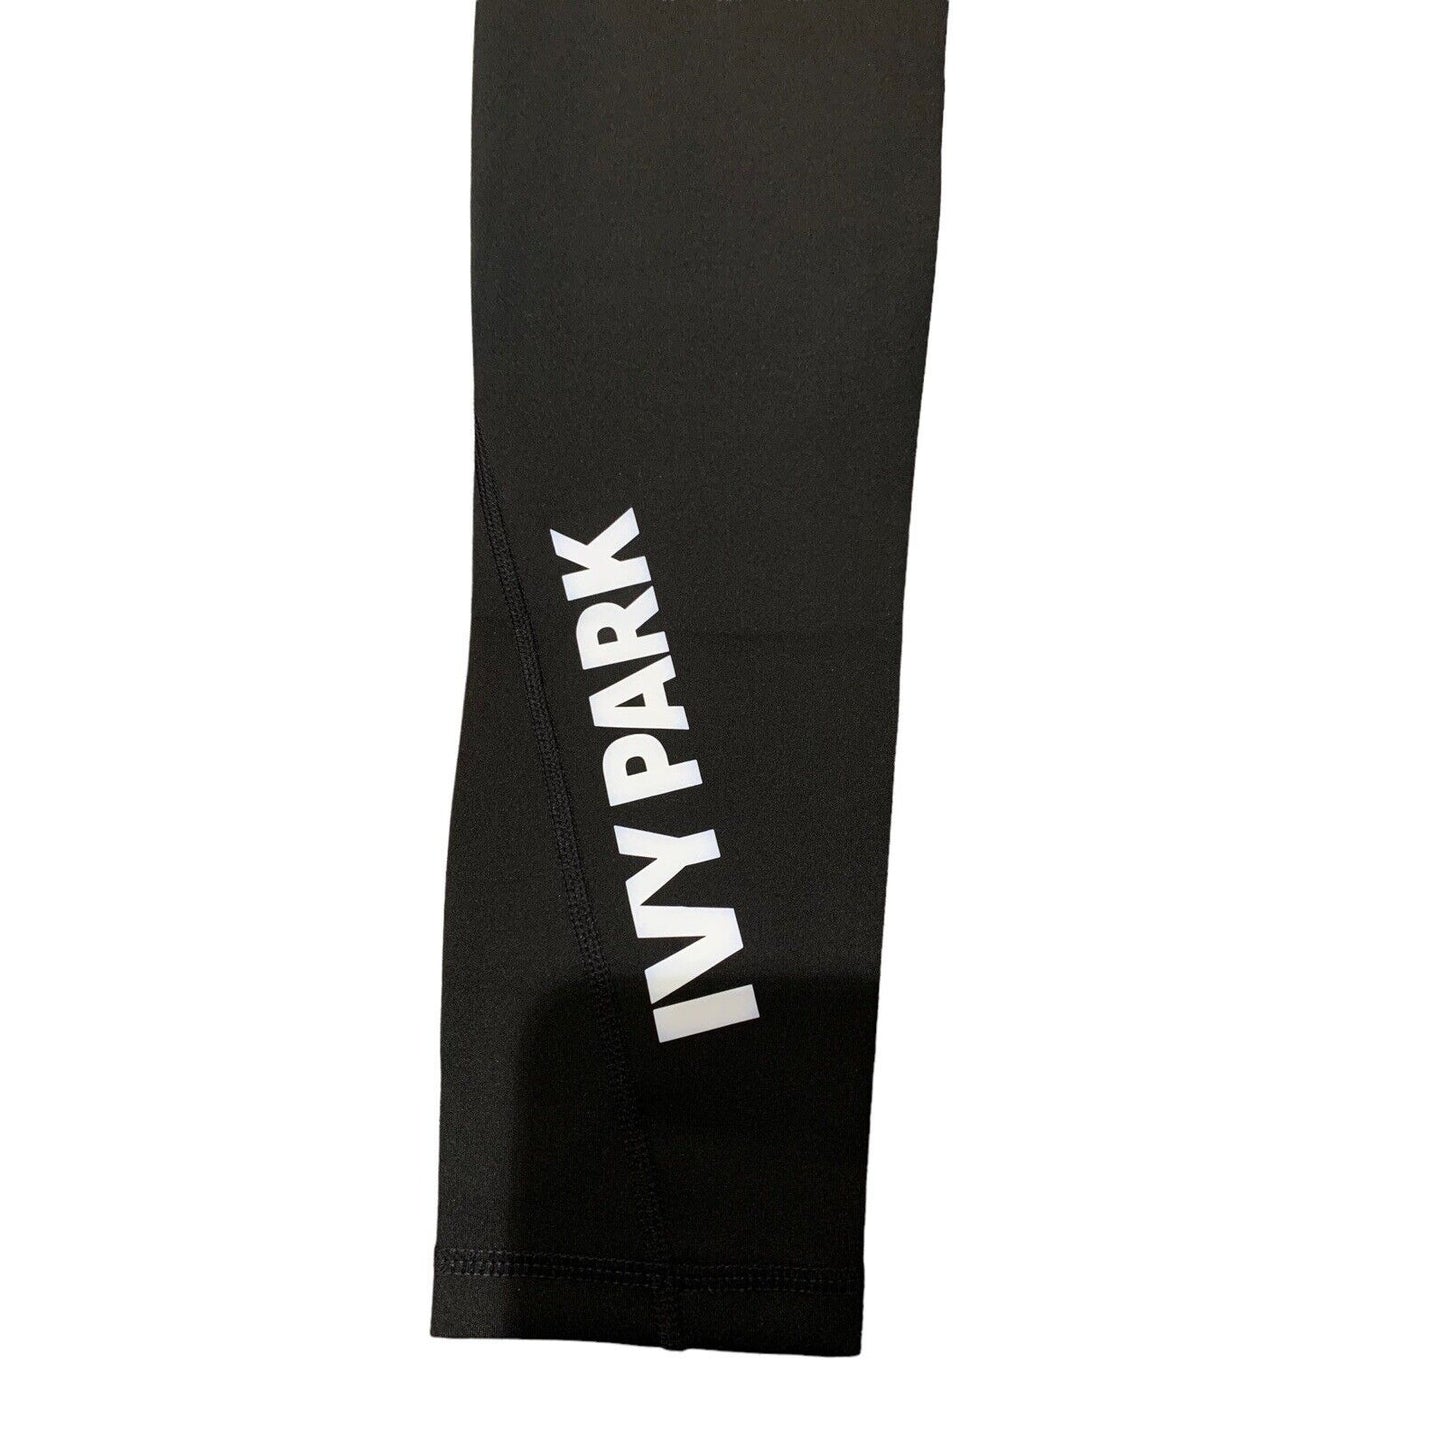 Ivy Park High Rise Sculpted Active Legging with White Optic Leg Graphic